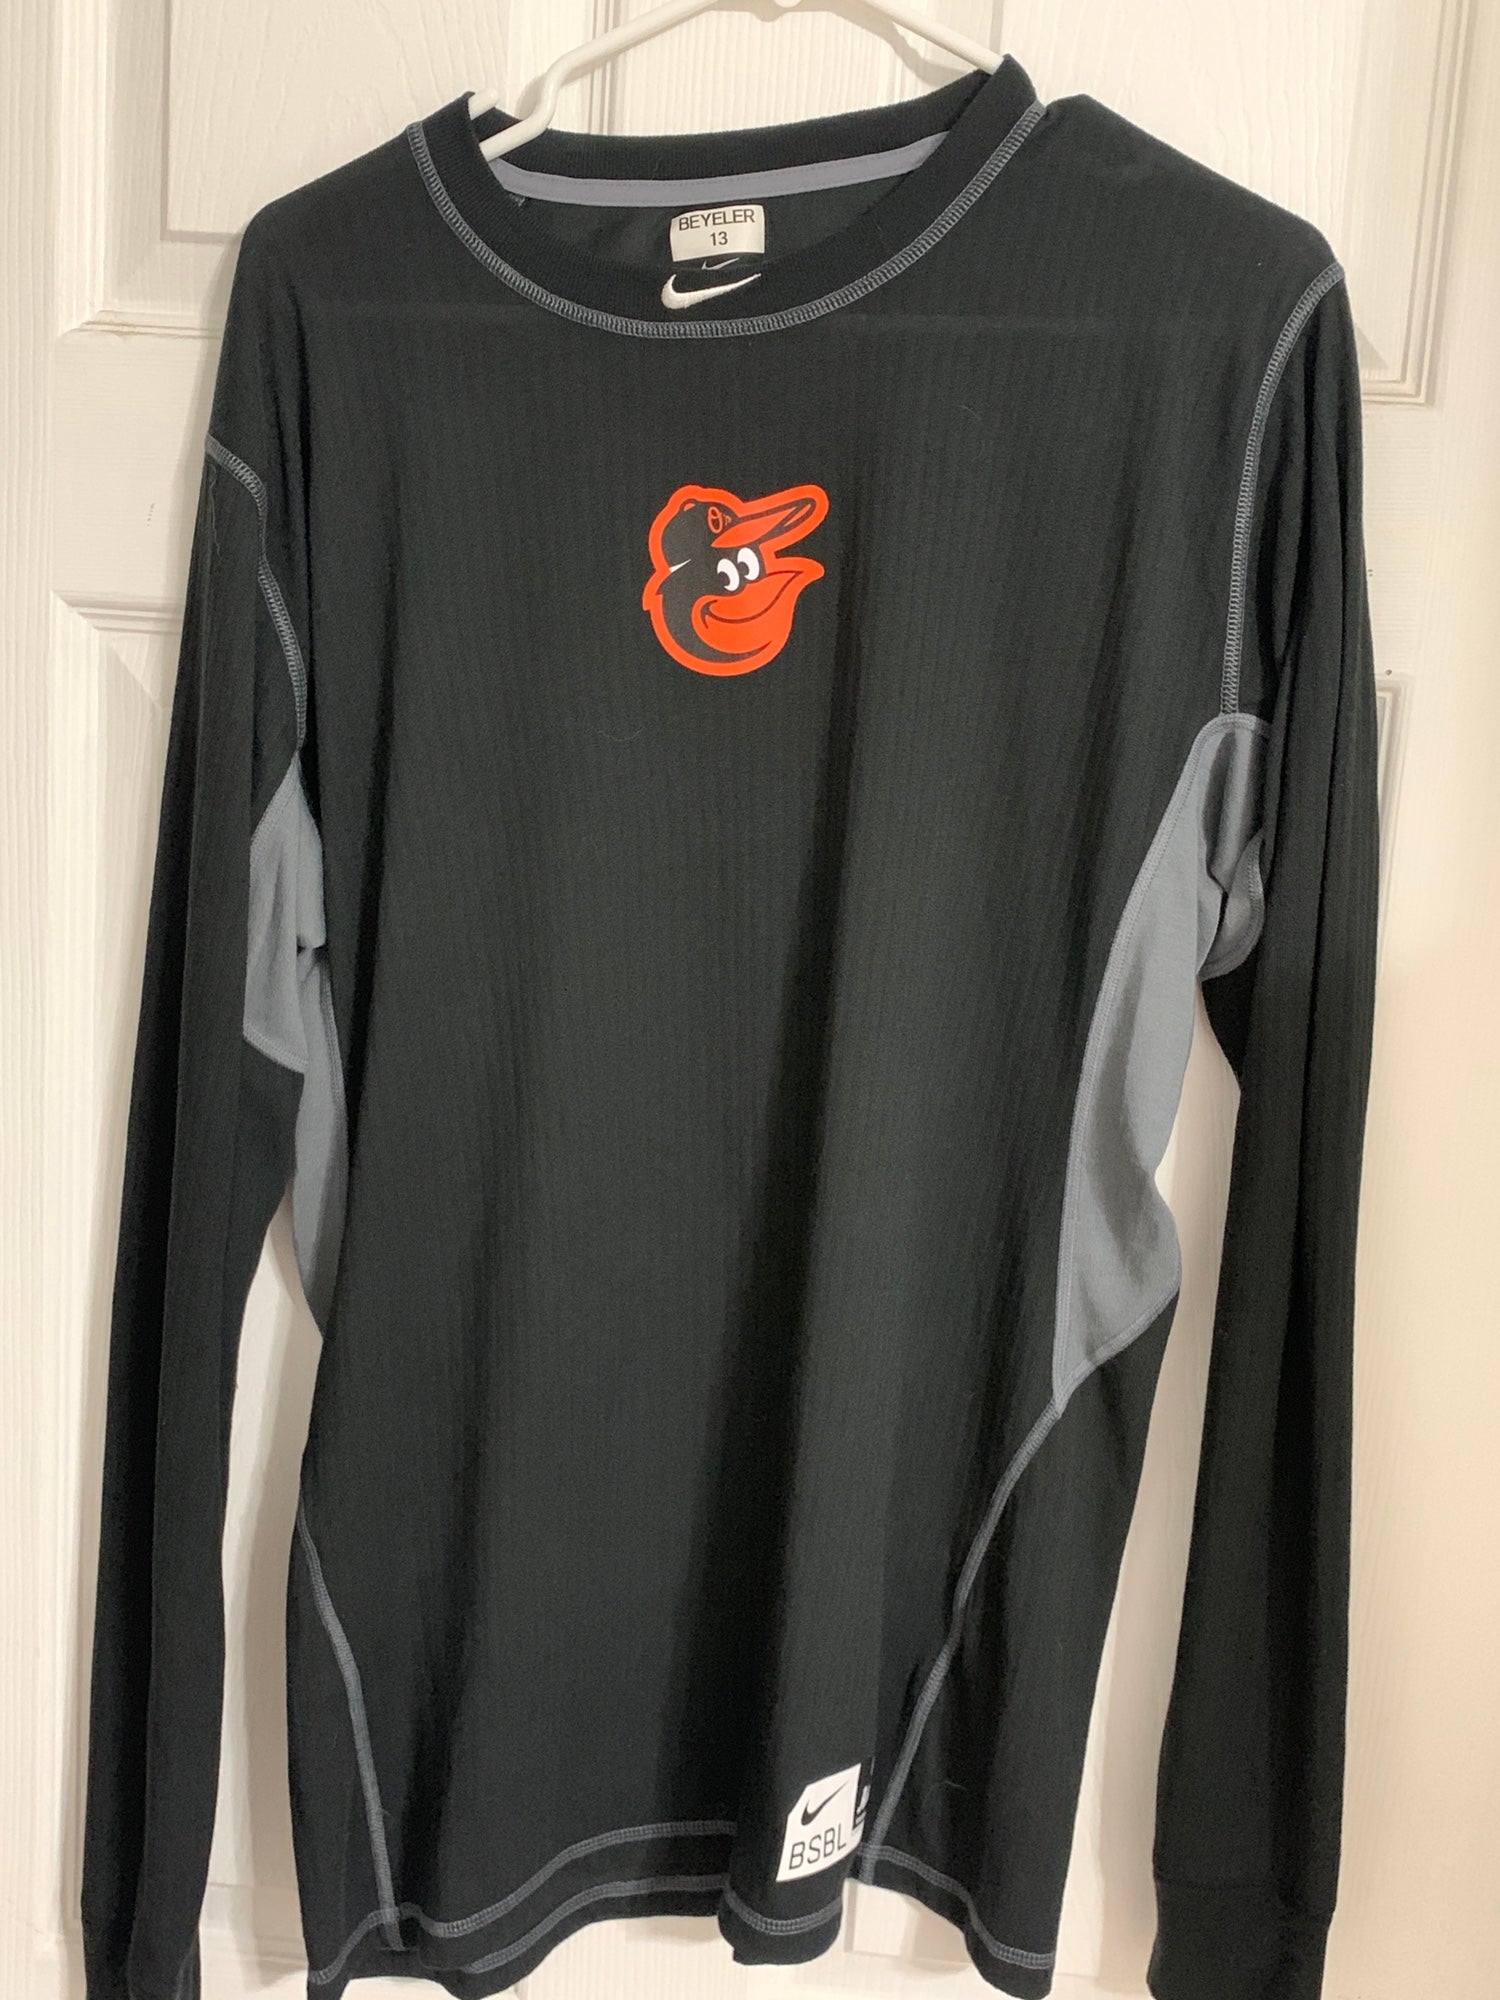 NIKE BALTIMORE ORIOLES TEAM ISSUED PLAYER Long Sleeve DRI FIT SHIRT LARGE